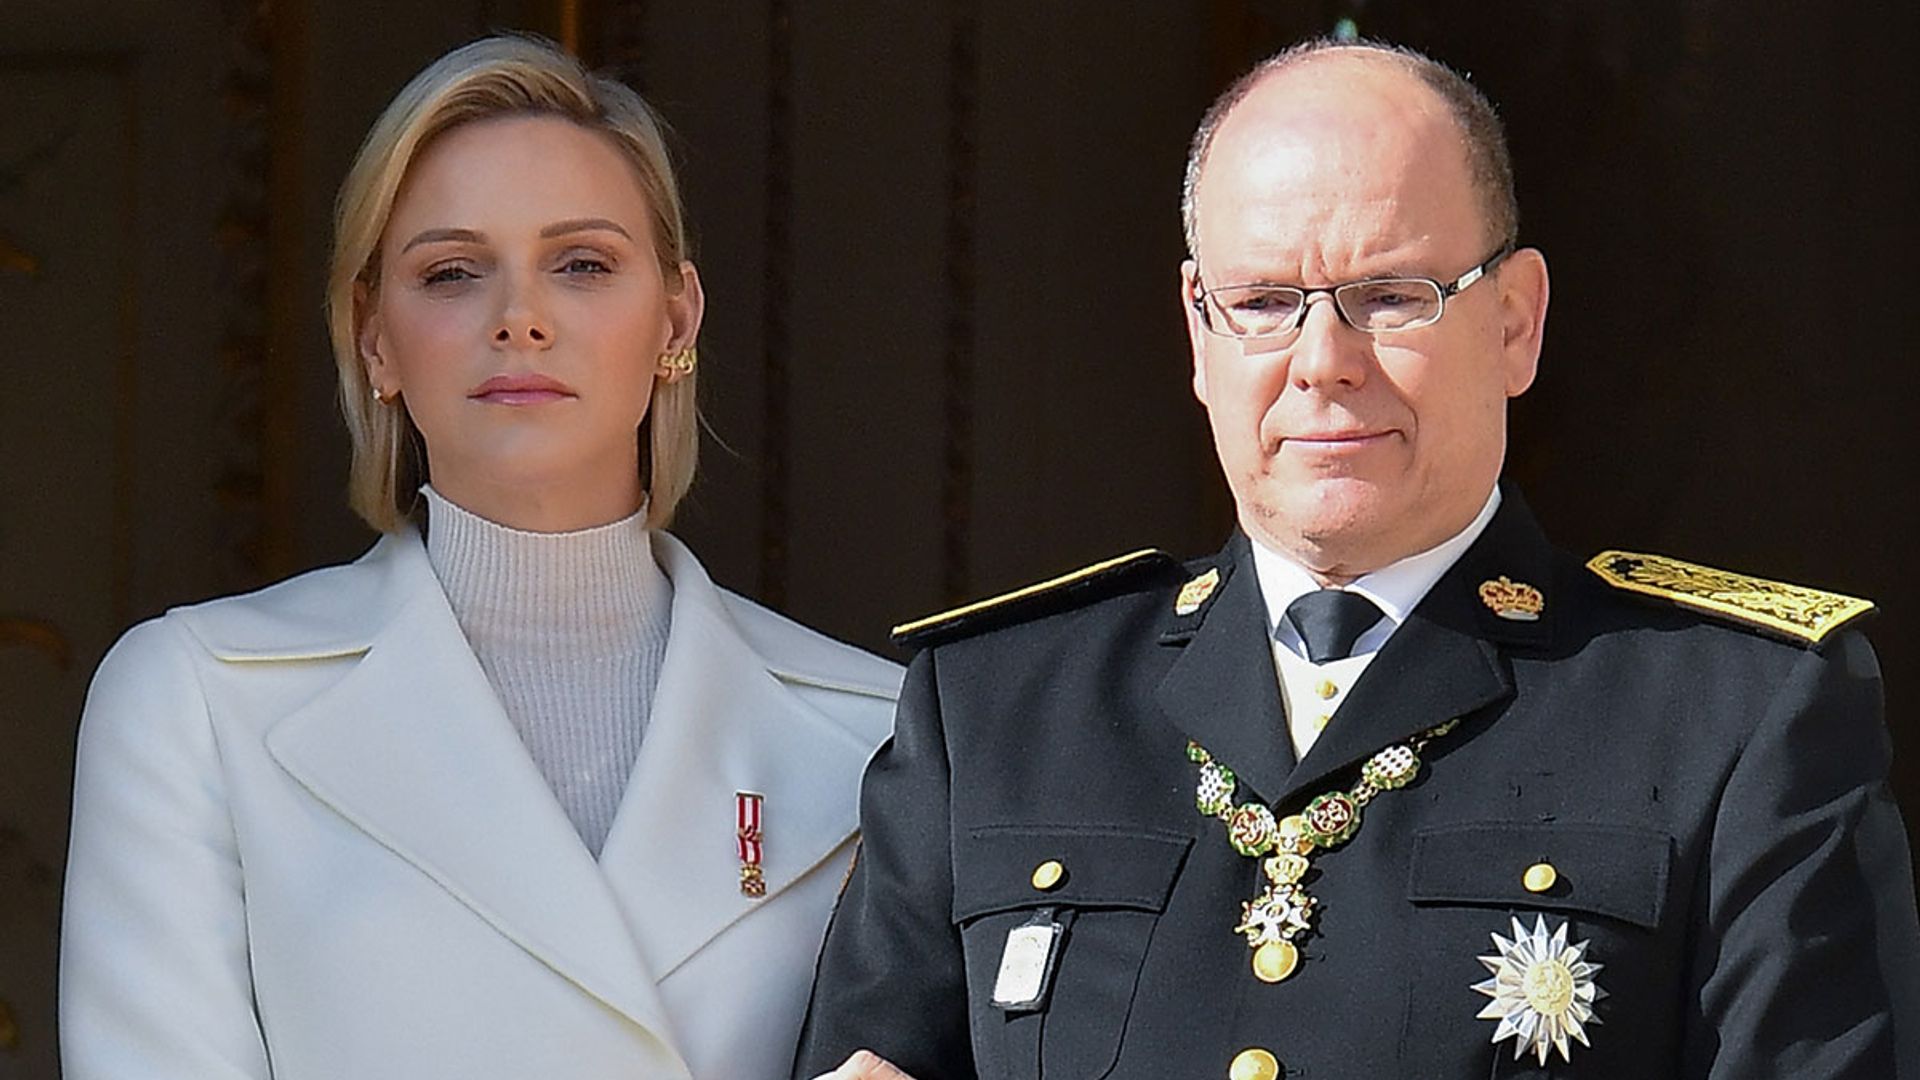 Prince Albert 'furious' about his ex's comments on Princess Charlene